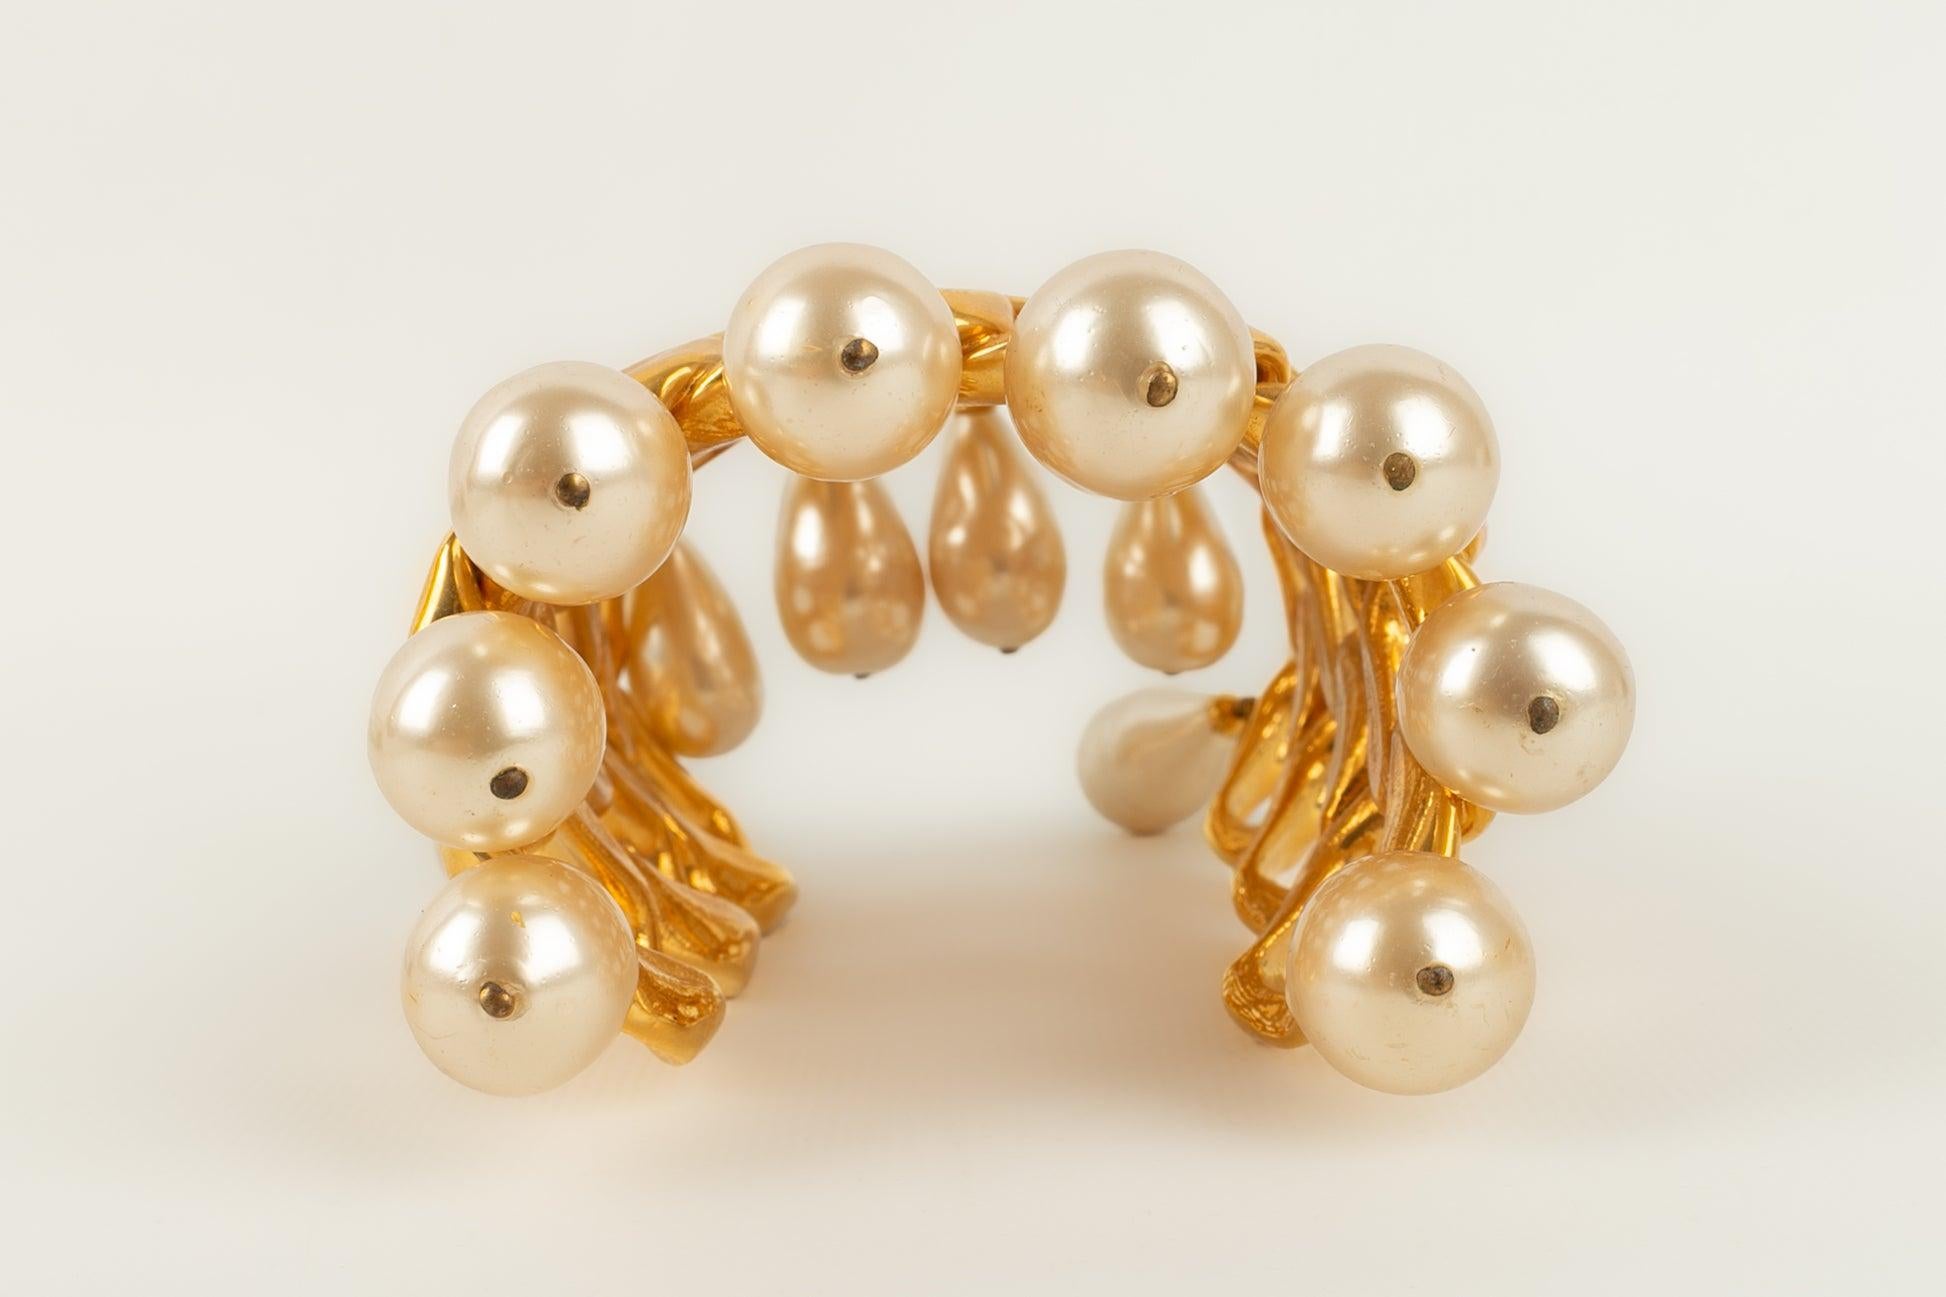 Women's Chanel Cuff Bracelet in Golden Metal, Costume Pearls, and Pearly Drops For Sale